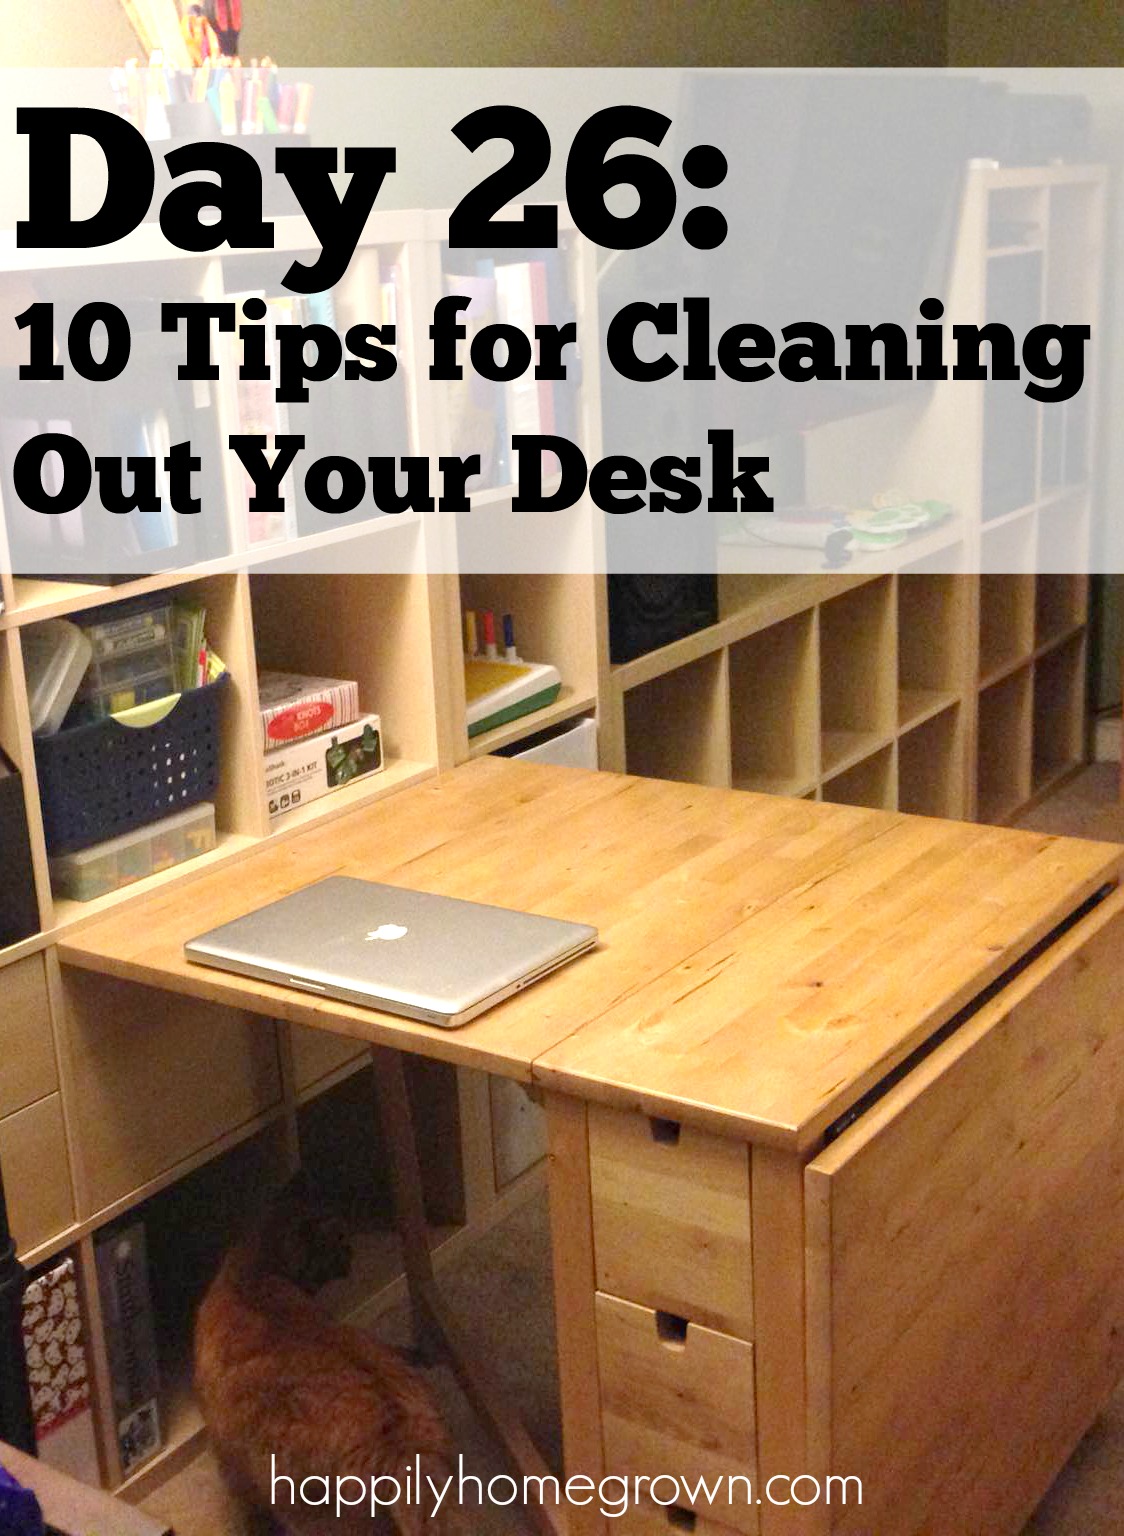 Cleaning up your desk should not be overwhelming. Here are 10 tips to help you to declutter your desk and get more organized.